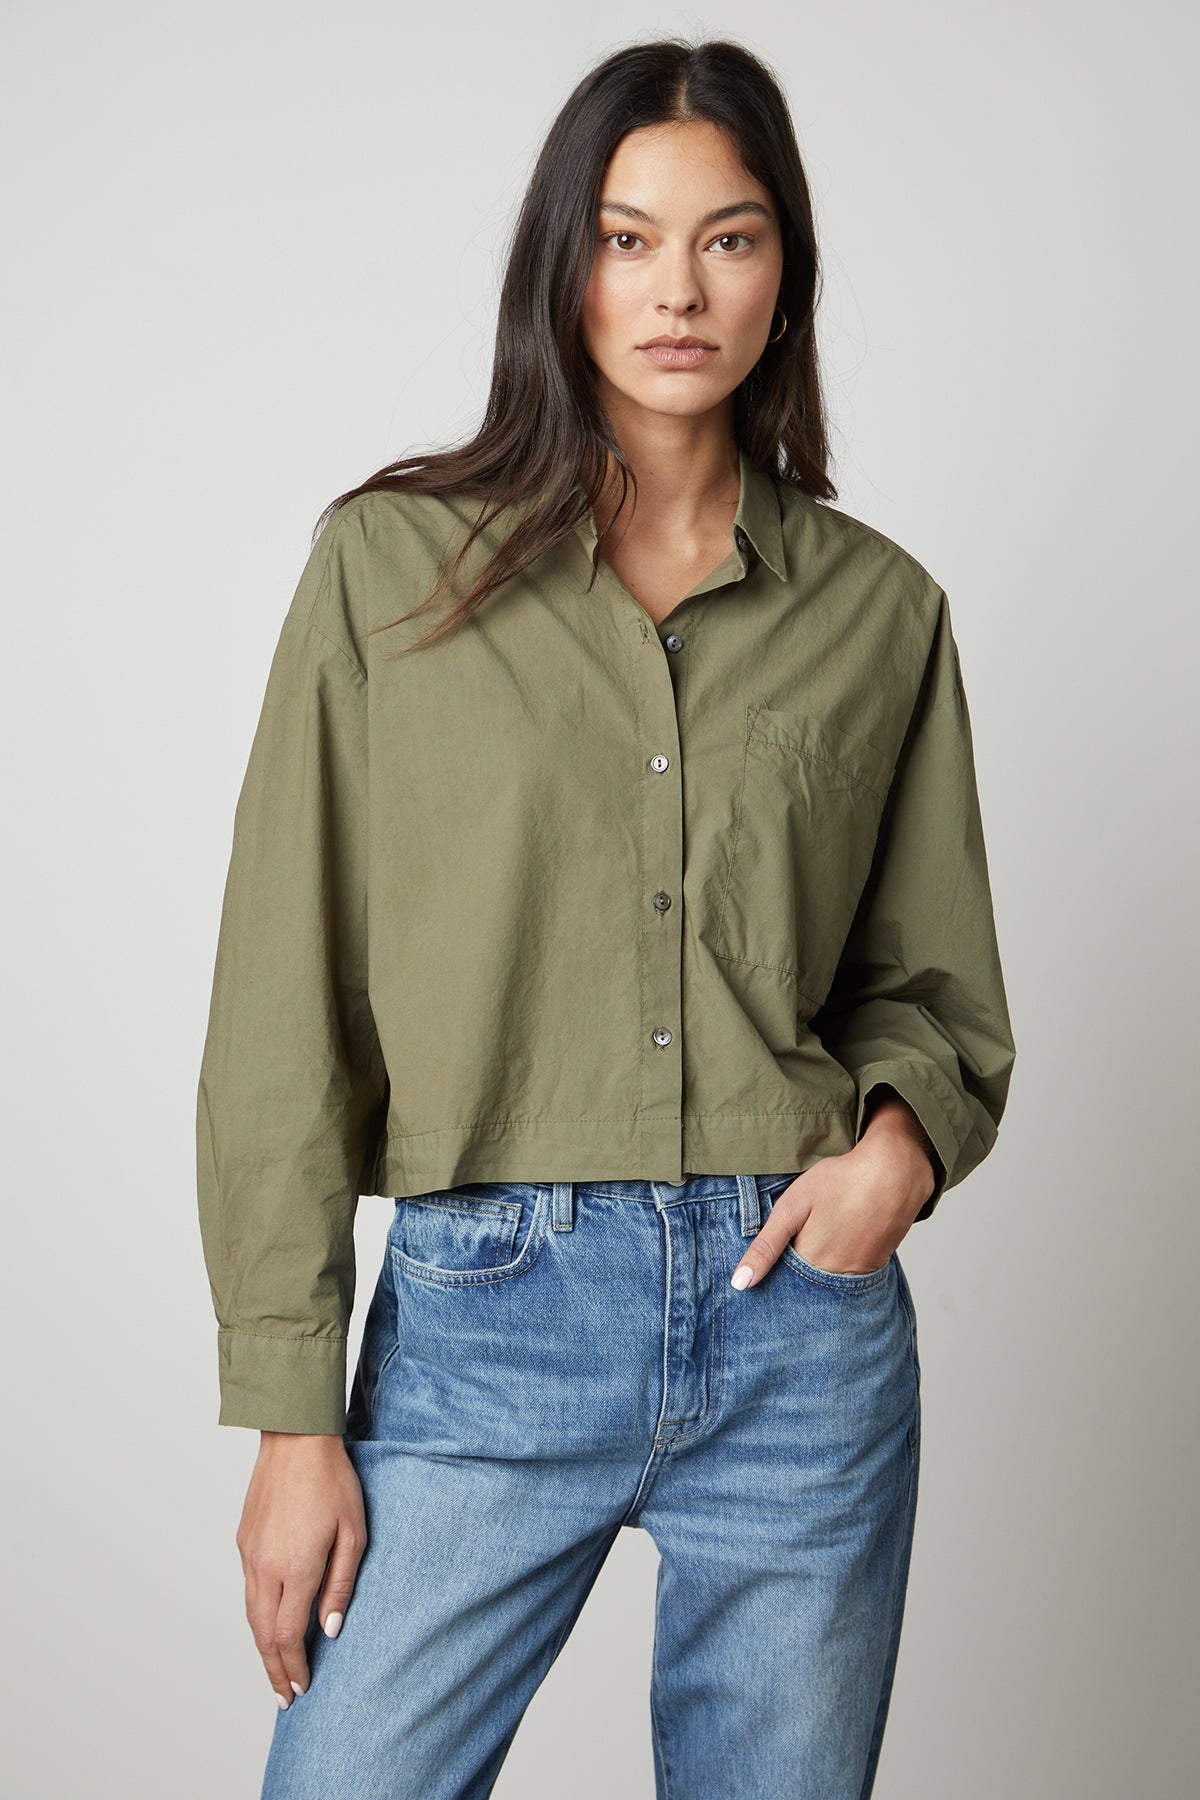   The LUCILLE CROPPED BUTTON-UP SHIRT in olive green by Velvet by Graham & Spencer. 